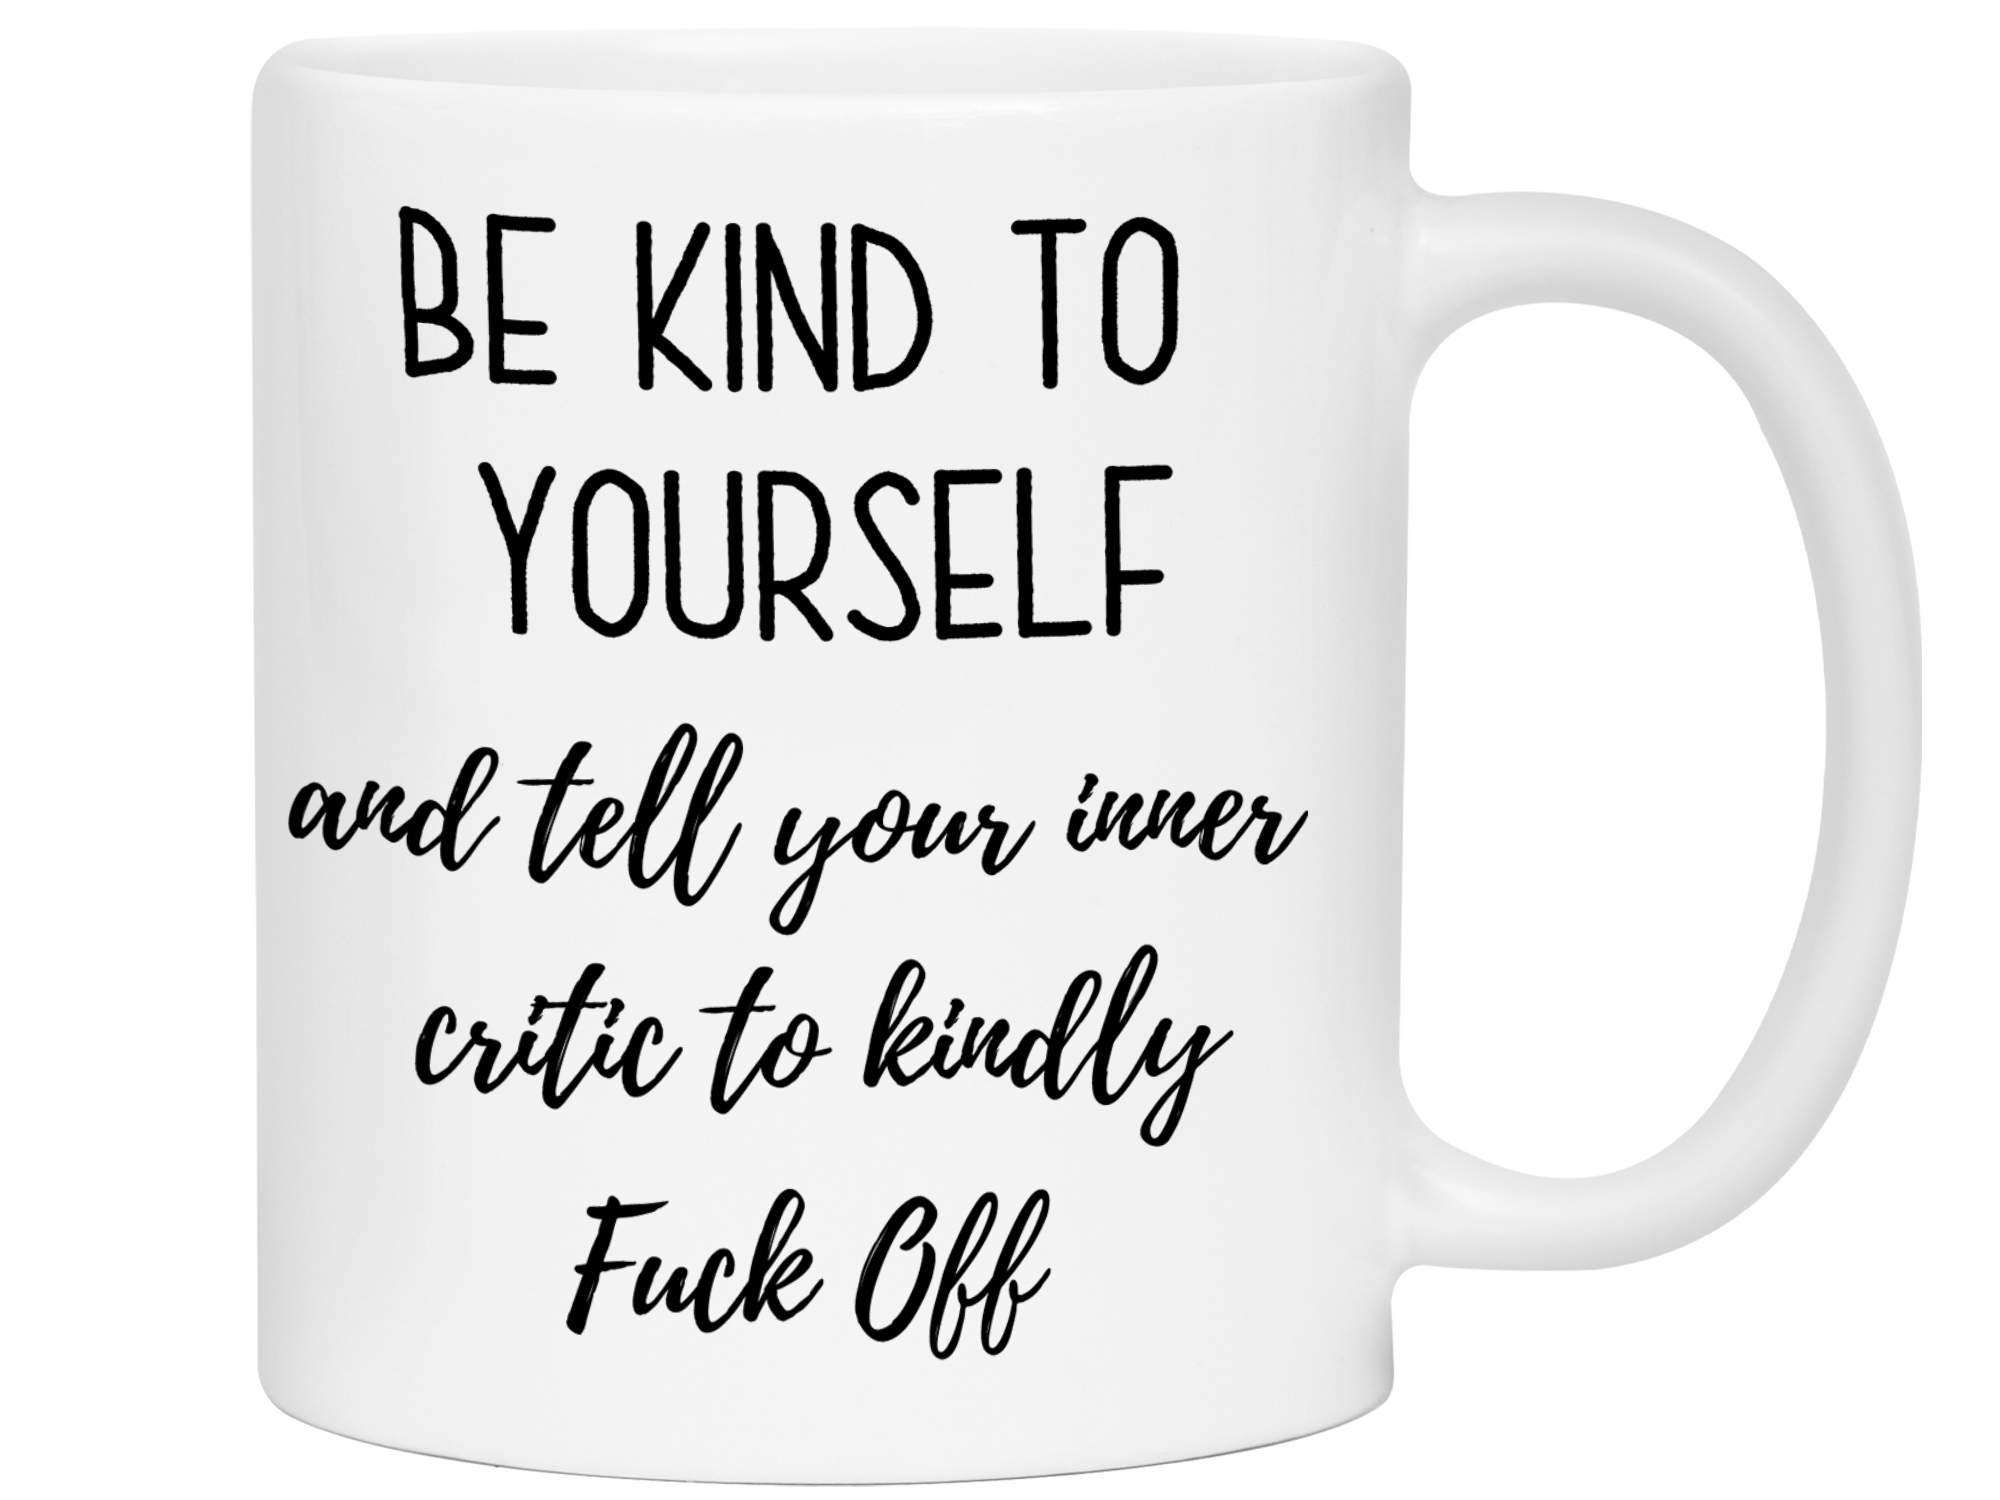 Self Encouraging Gifts - Be Kind to Yourself Funny Coffee Mug - Gag Self Encouragement Motivational Quote Cups